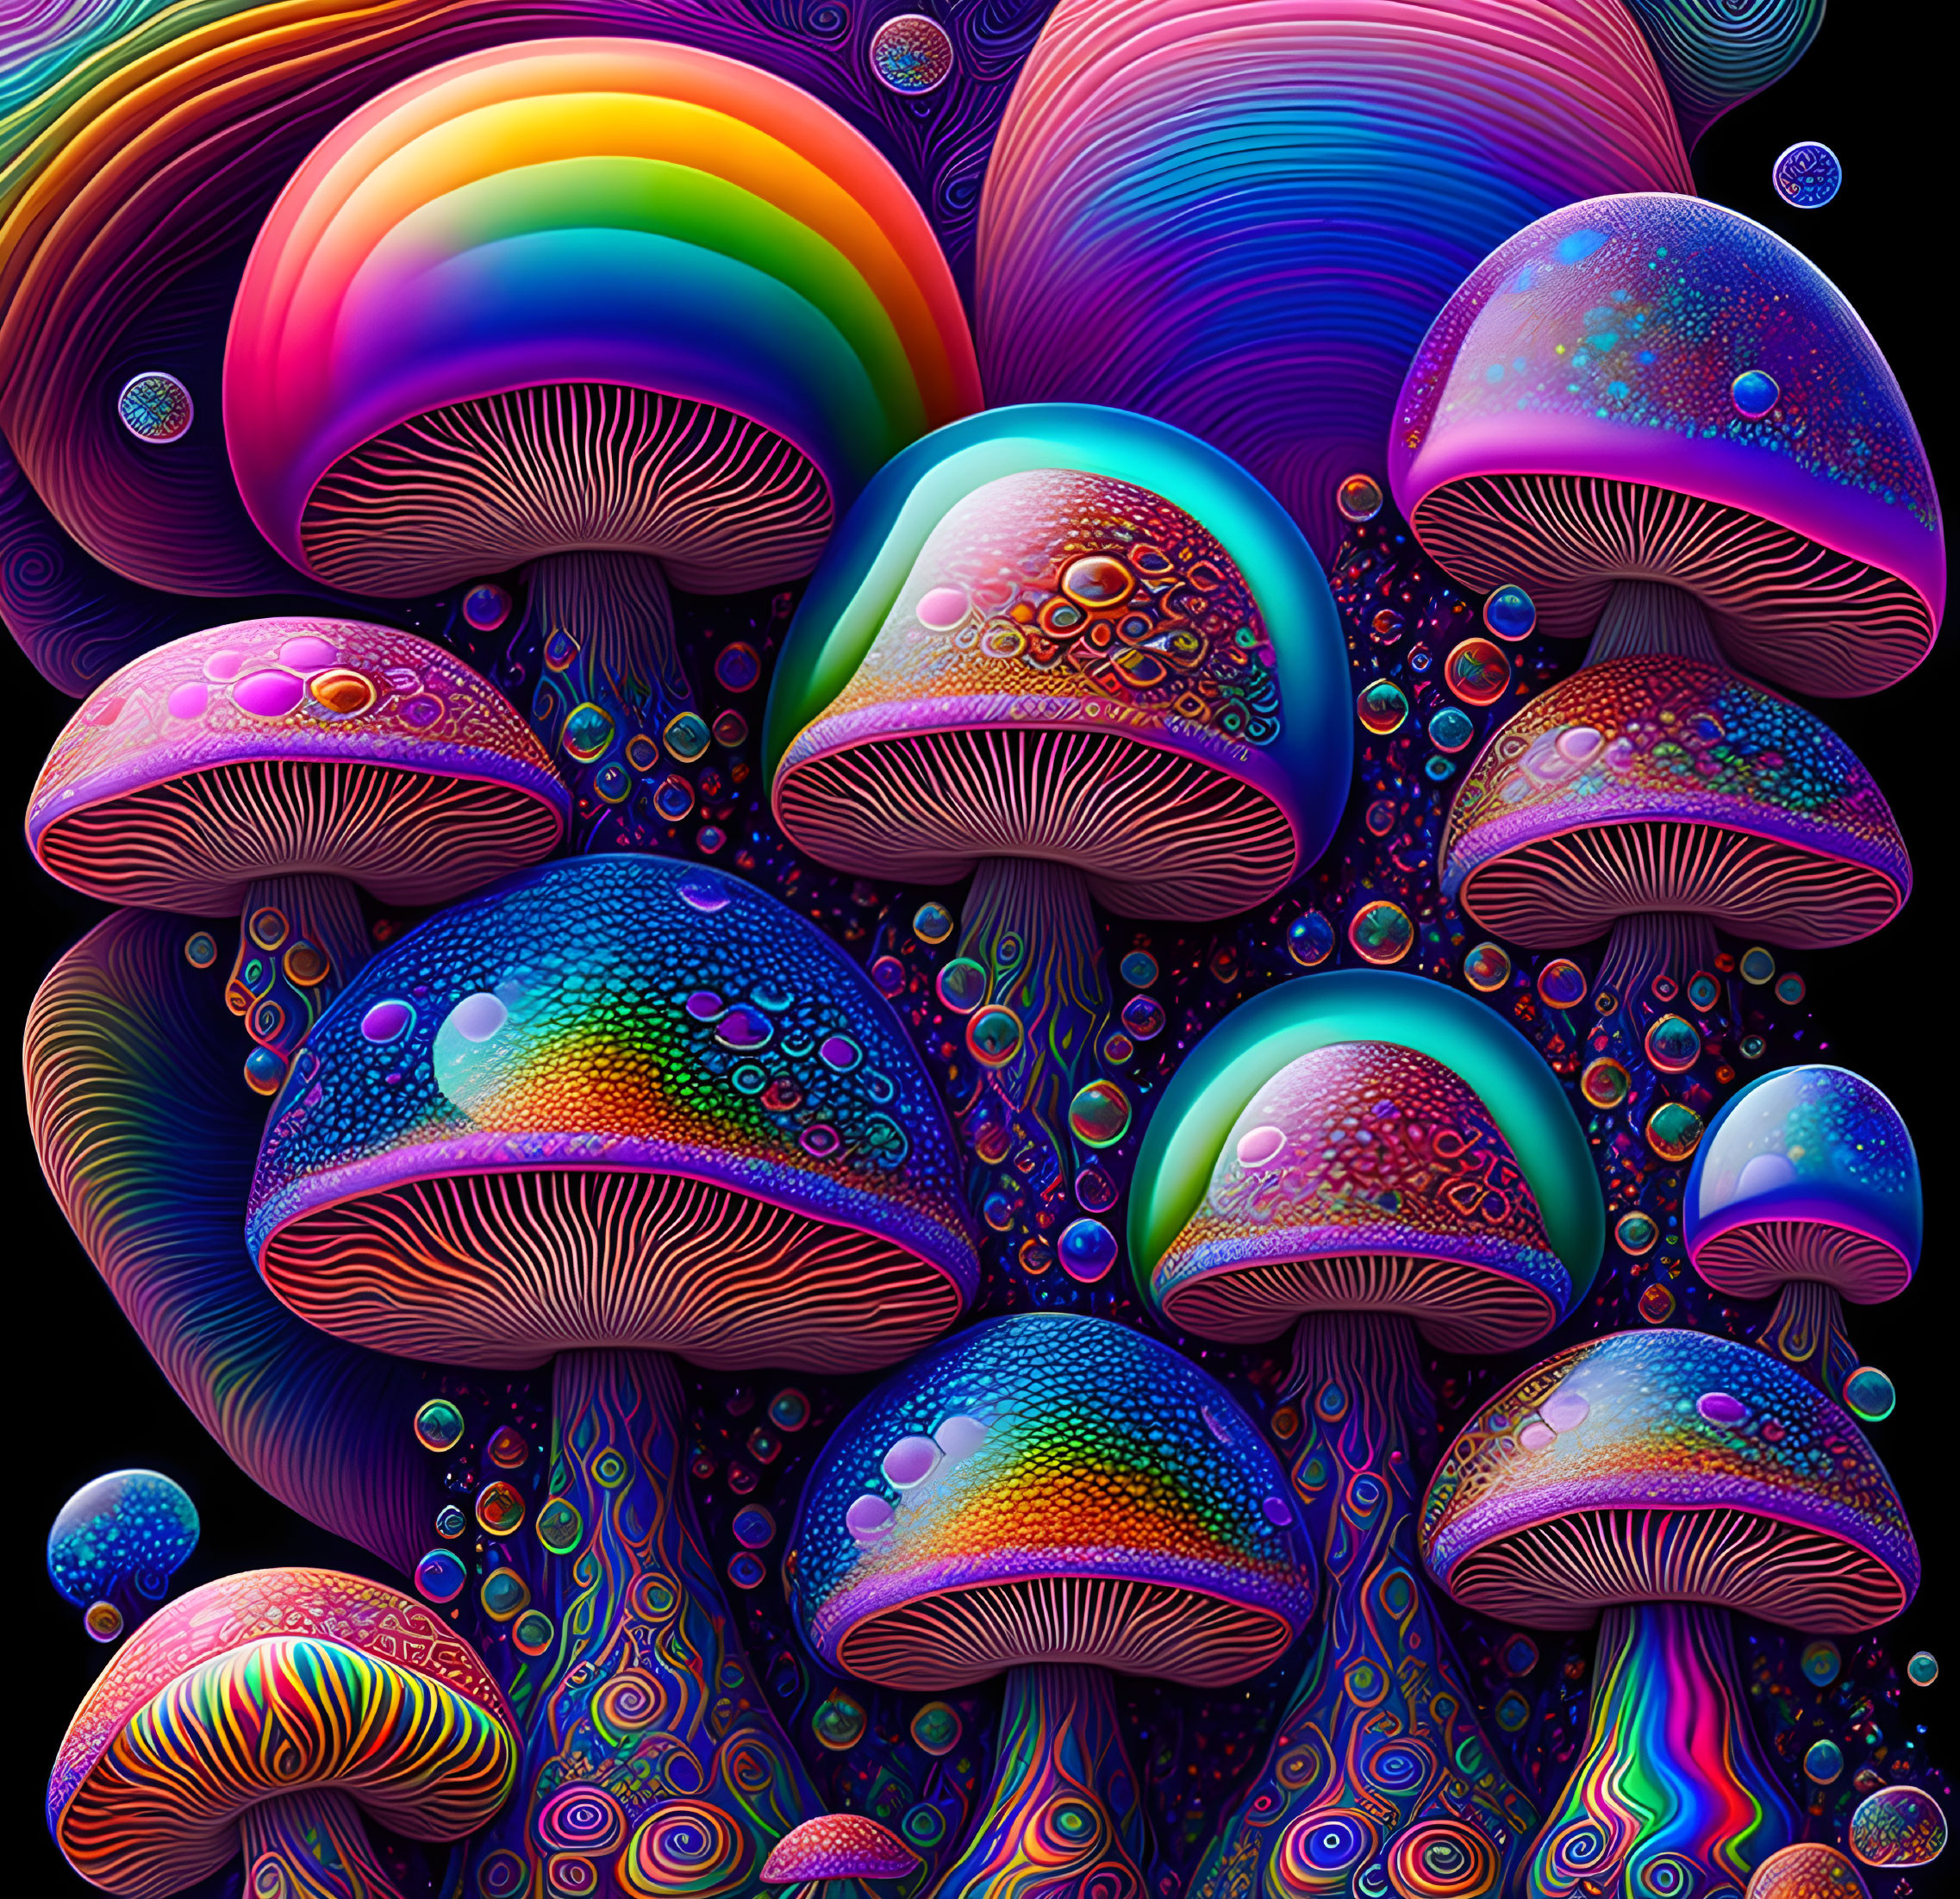 Magic Mushrooms from another planet 